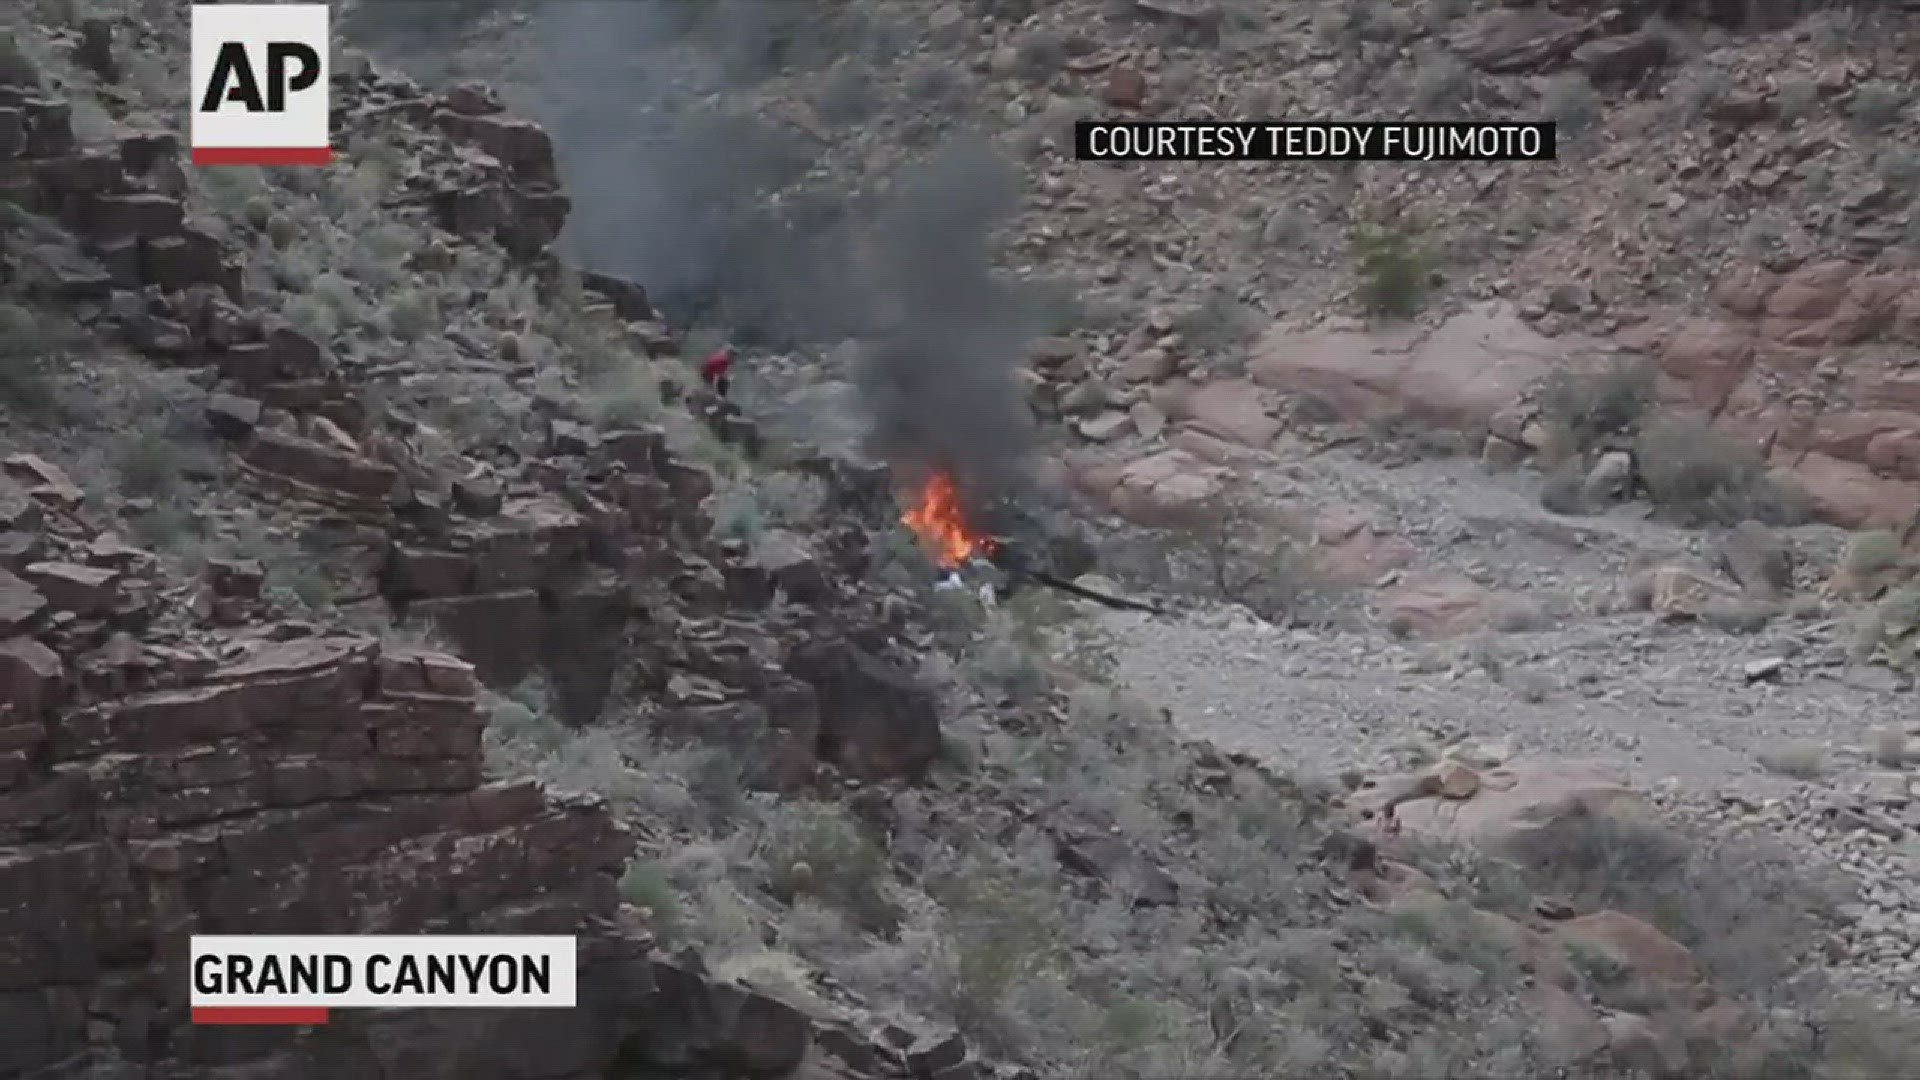 Four survivors of a deadly tour helicopter crash onto the jagged rocks of the Grand Canyon were being treated at a Nevada hospital on Sunday while crews tackled difficult terrain in a very remote area to try to recover the bodies of three other people.